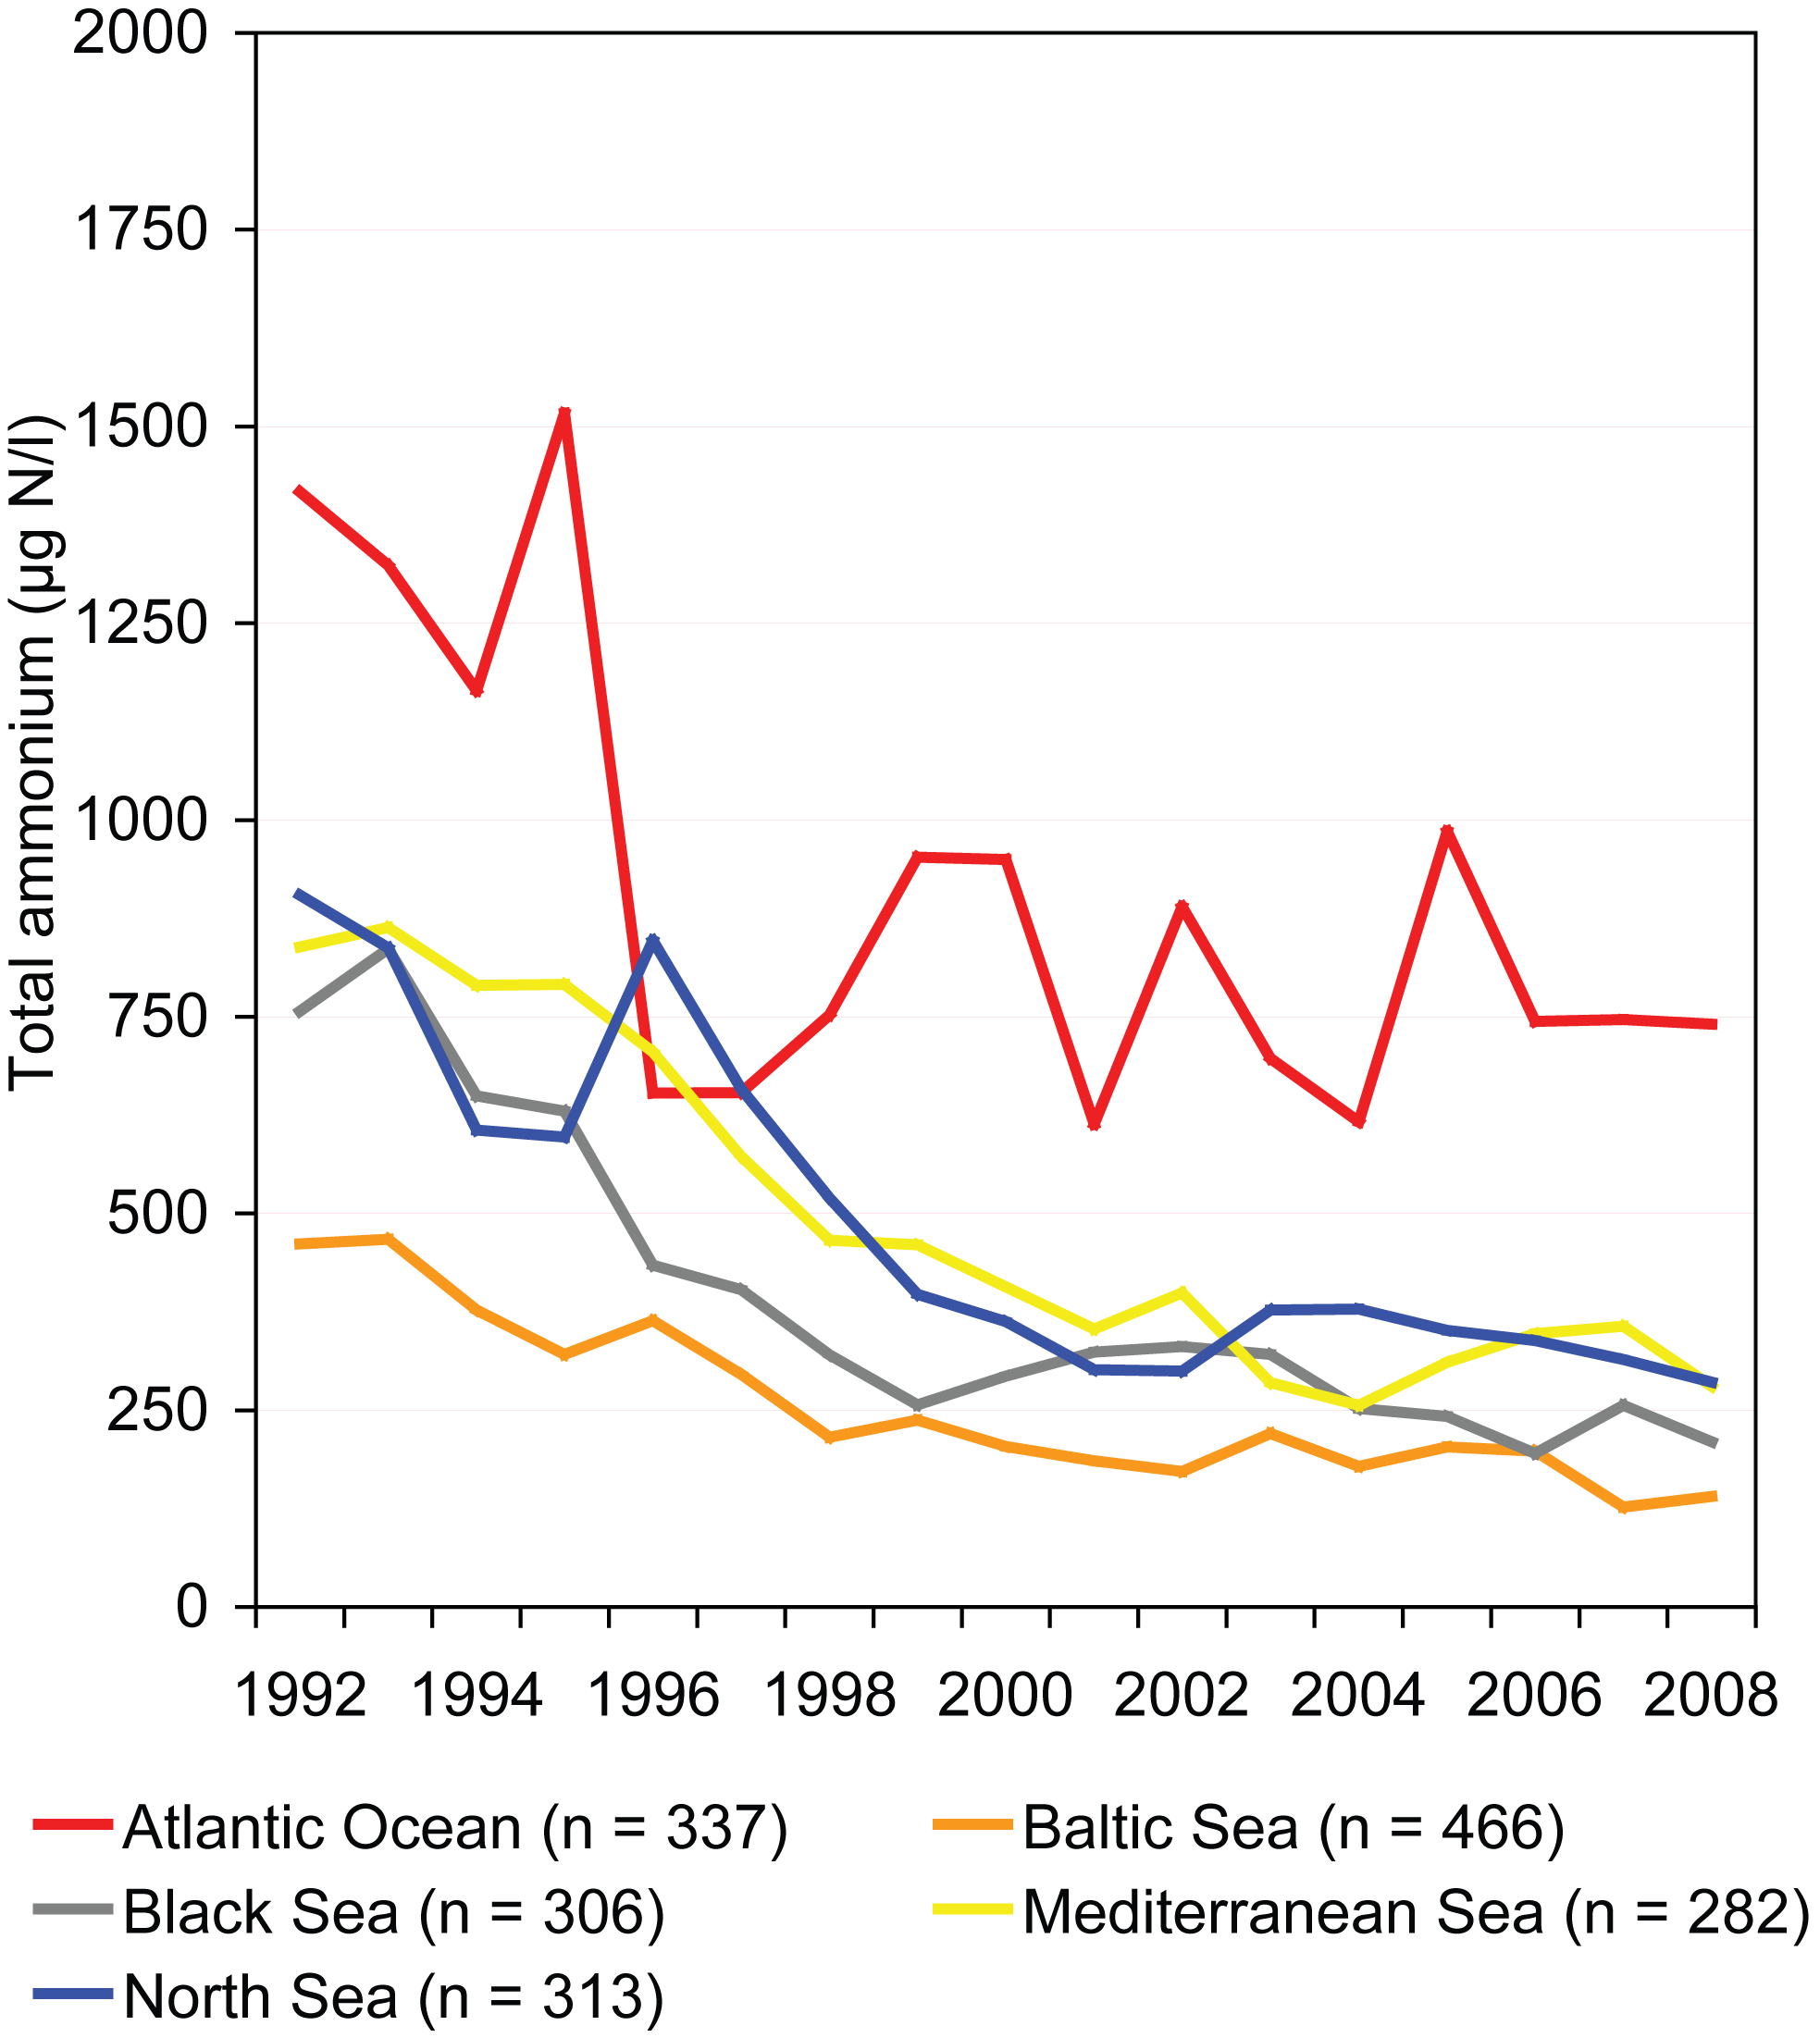 Total ammonium concentrations in rivers between 1992 and 2008 in different sea regions of Europe